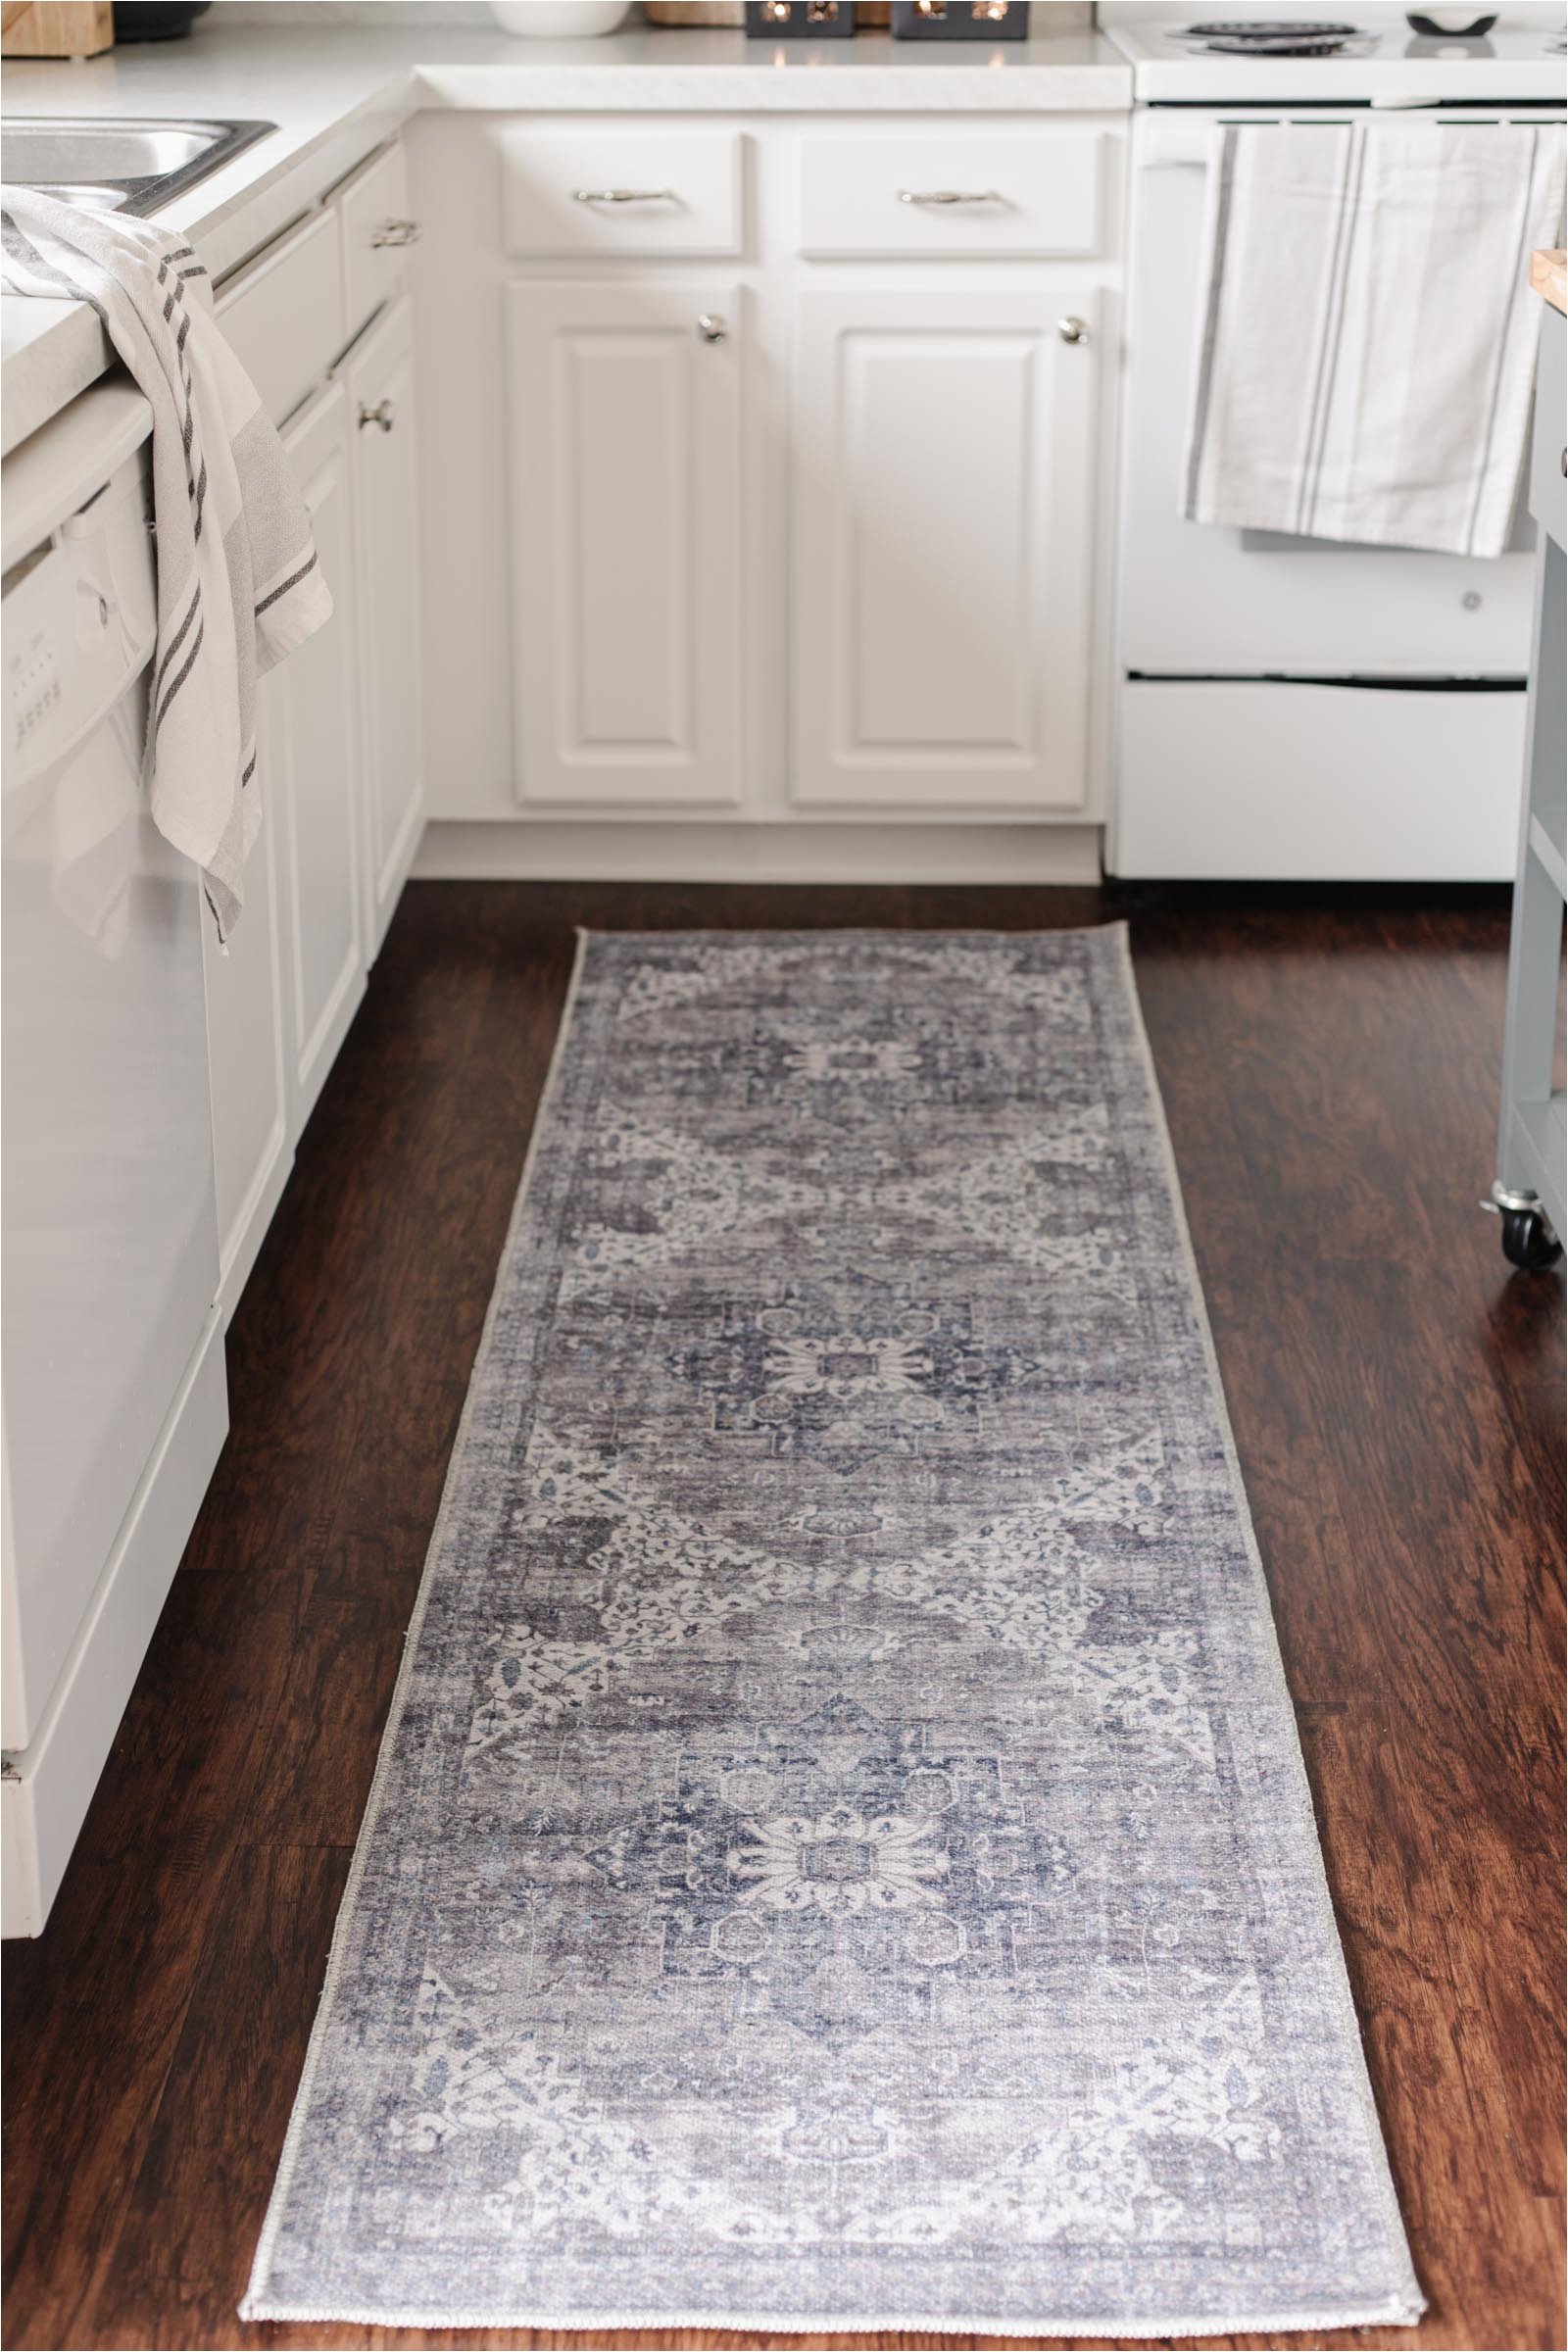 Washable area Rugs and Runners Budget Friendly Washable Rugs Roundup – Caitlin Marie Design